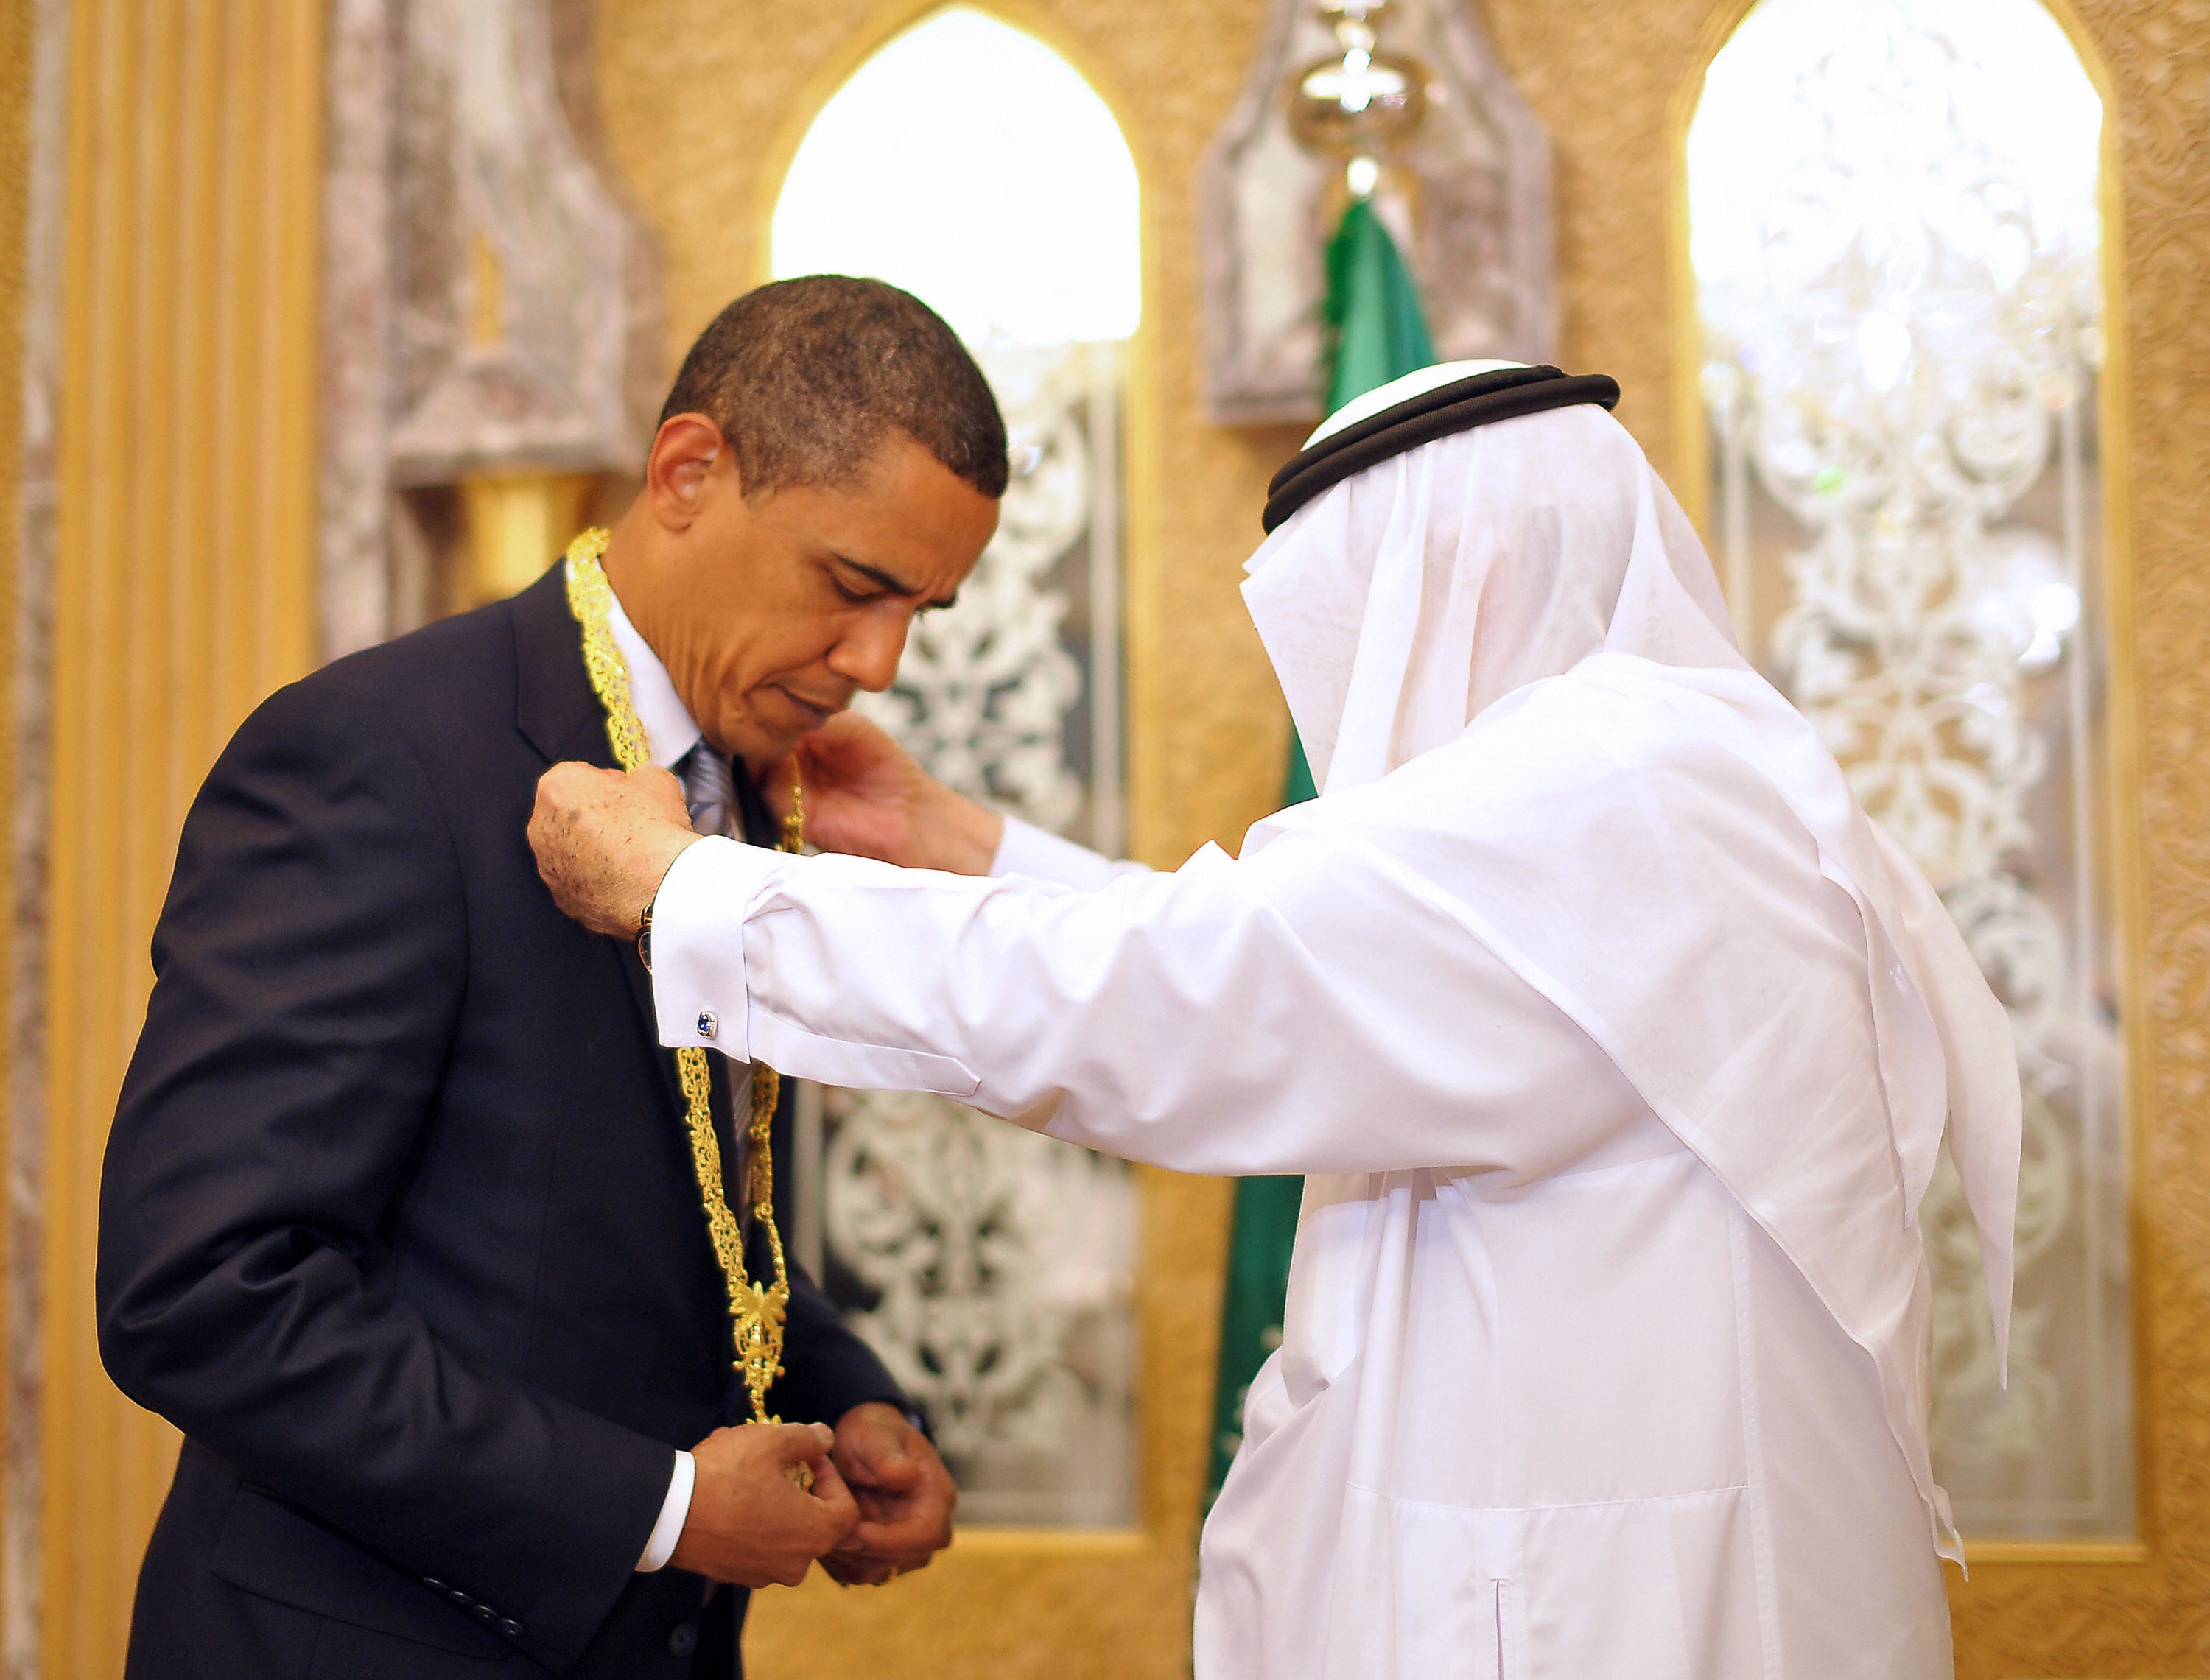 MANDEL NGAN/AFP/Getty Images. Saudi King Abdullah bin Abdul Aziz al-Saud presents US President Barack Obama (L) with the King Abdul Aziz Order of Merit during a bilateral meeting at the king's ranch in al-Janadriya in the outskirts of Riyadh June 3, 2009. Obama launched a landmark Middle East trip to reach out to the world's Muslims, but earned a swift rebuke from Osama bin Laden in a stinging new audiotape.